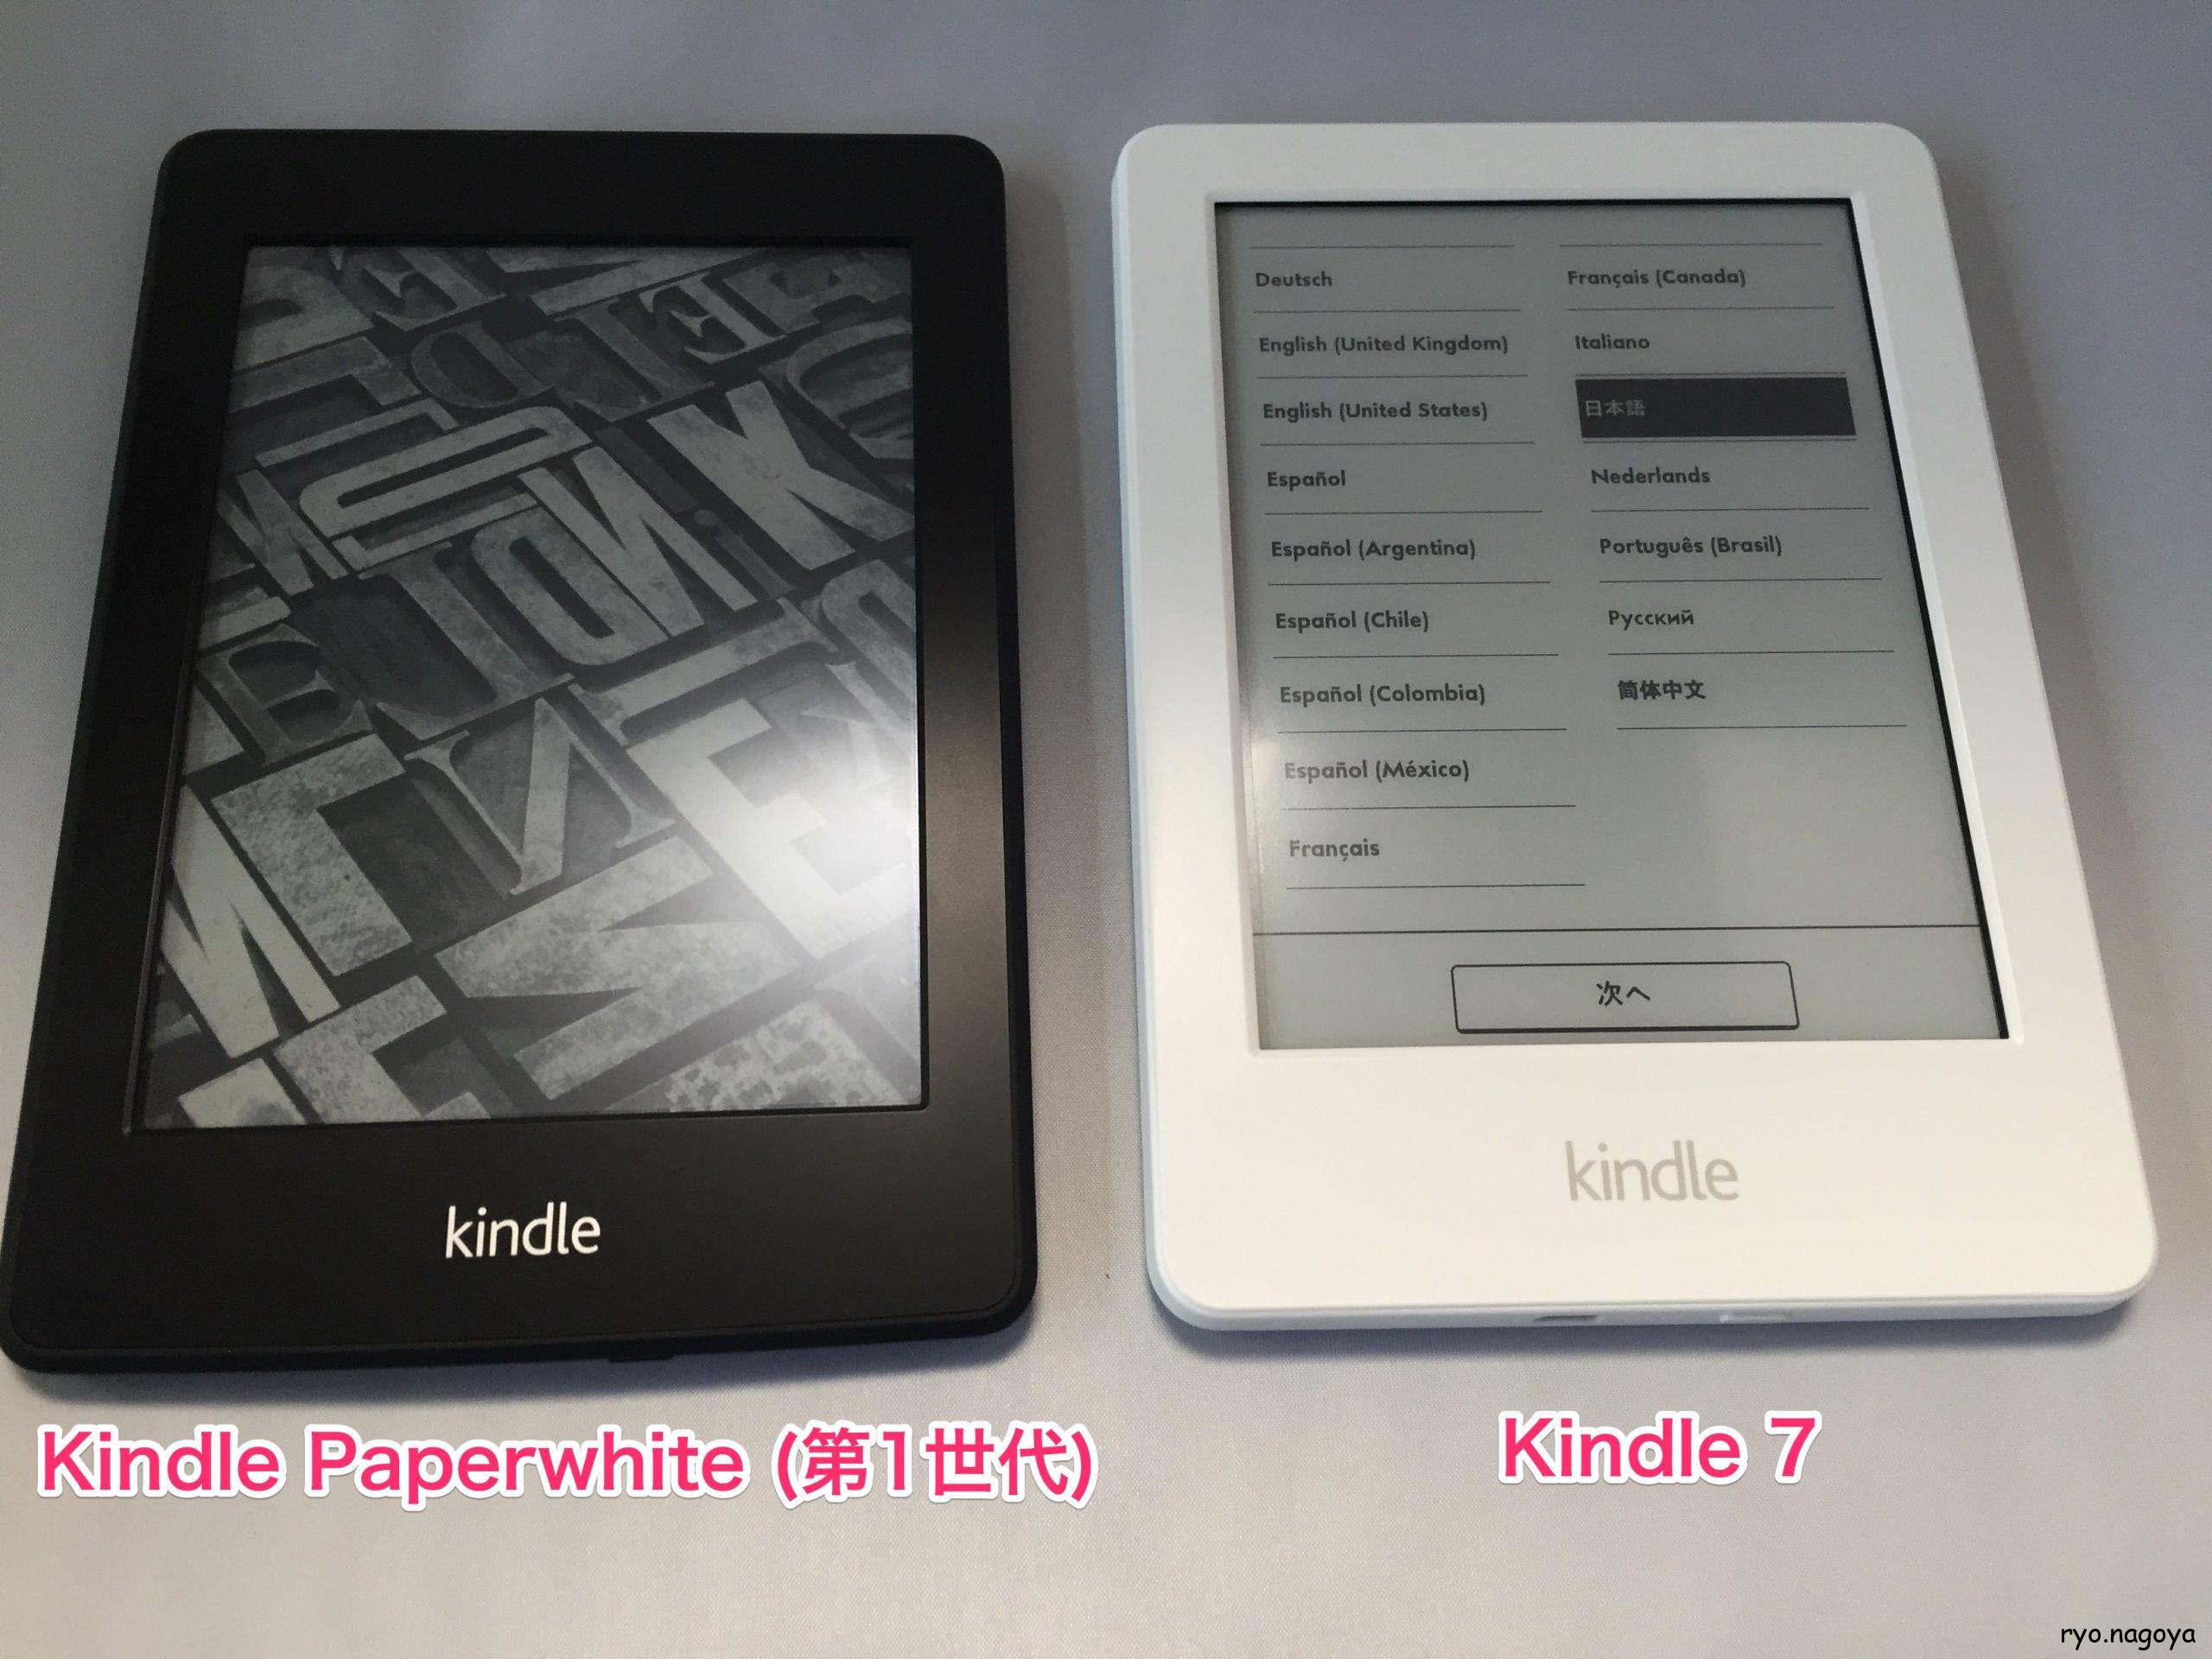 Kindle Paperwhite (第1世代)とKindle 7見た目比較